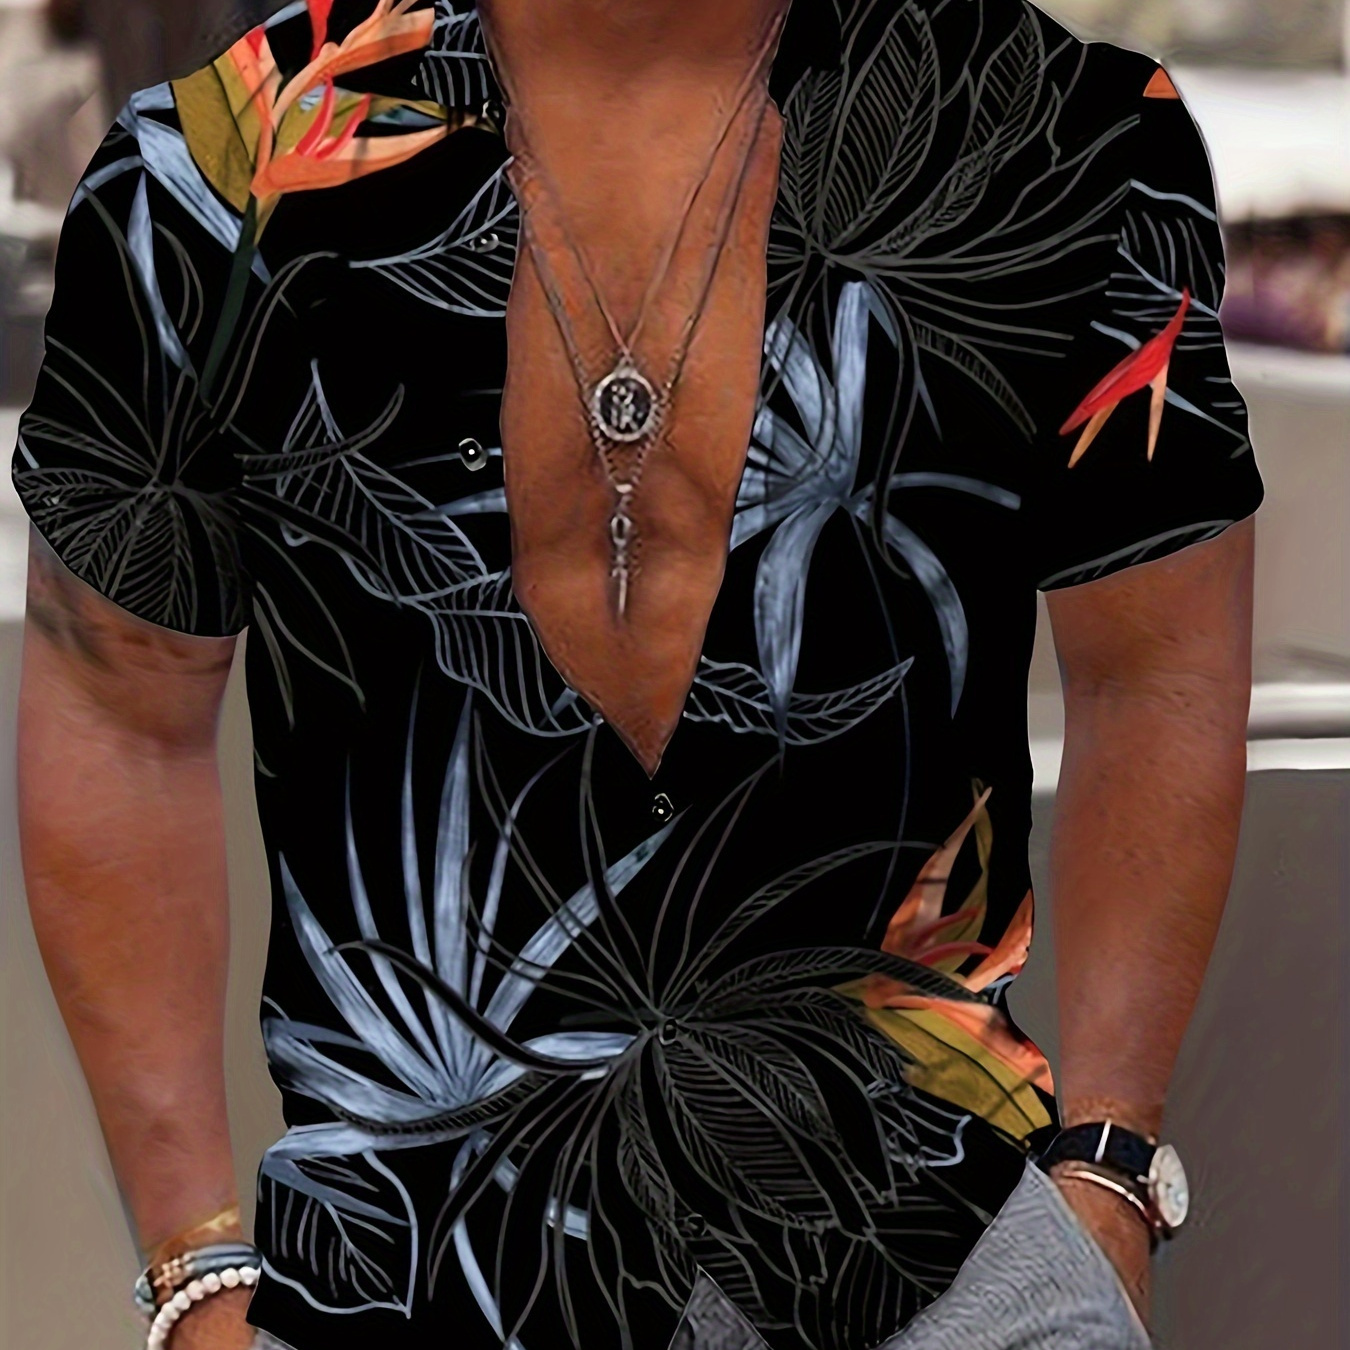 

Men's Trendy Hawaiian Lapel Collar Graphic Shirt With Stylish Floral Print For Summer Vacation And Casual Wear